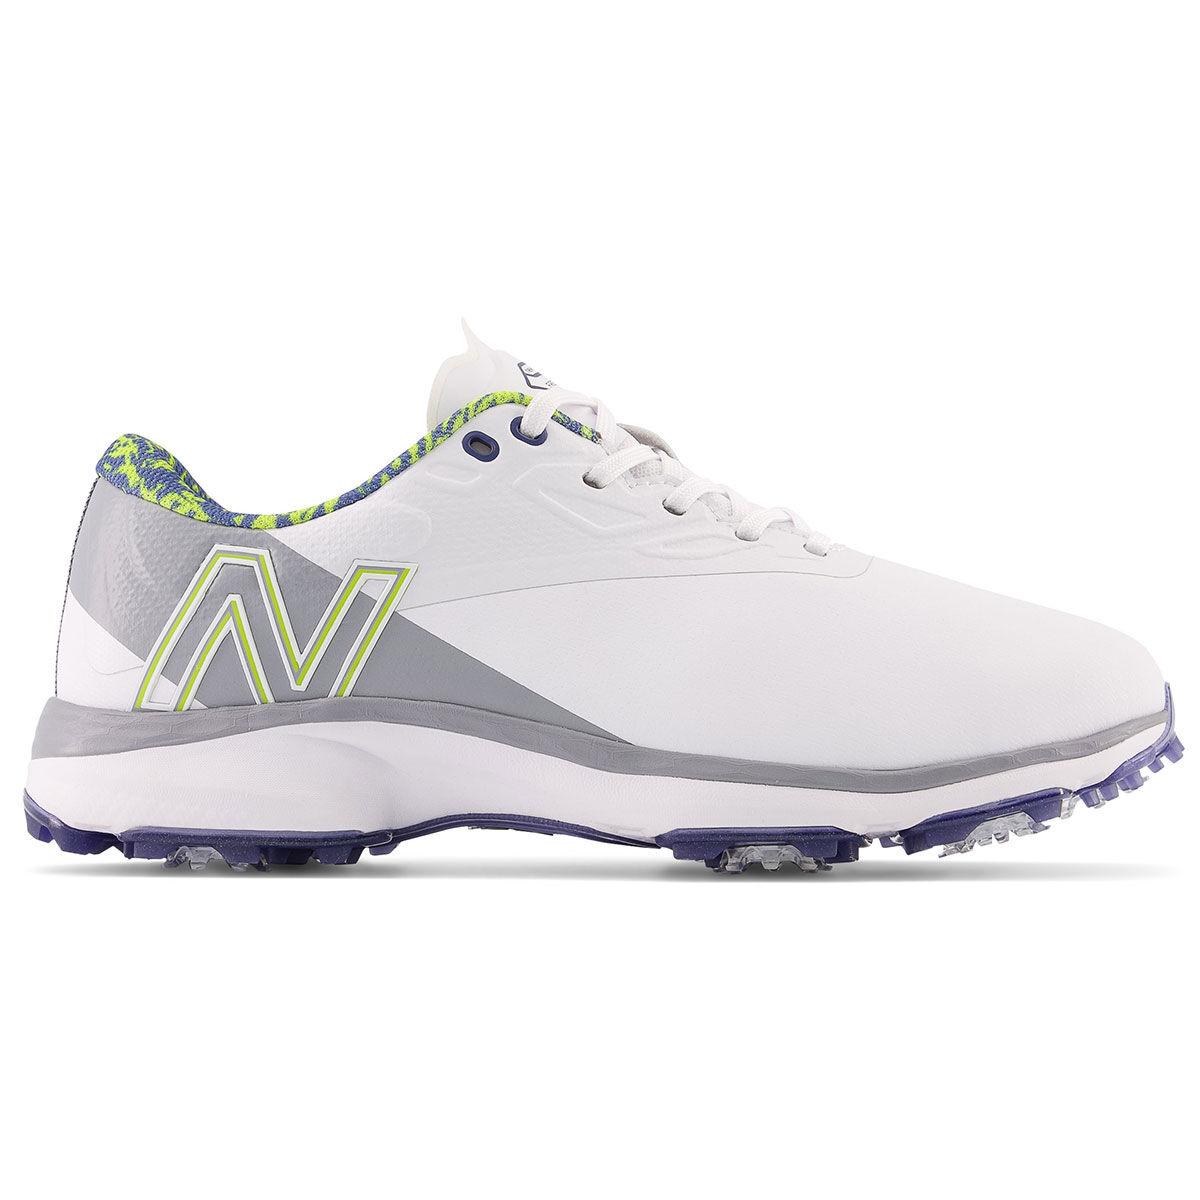 New Balance Men’s White and Grey Lightweight Fresh Foam X Defender Waterproof Spiked Golf Shoes, Size: 8.5 | American Golf